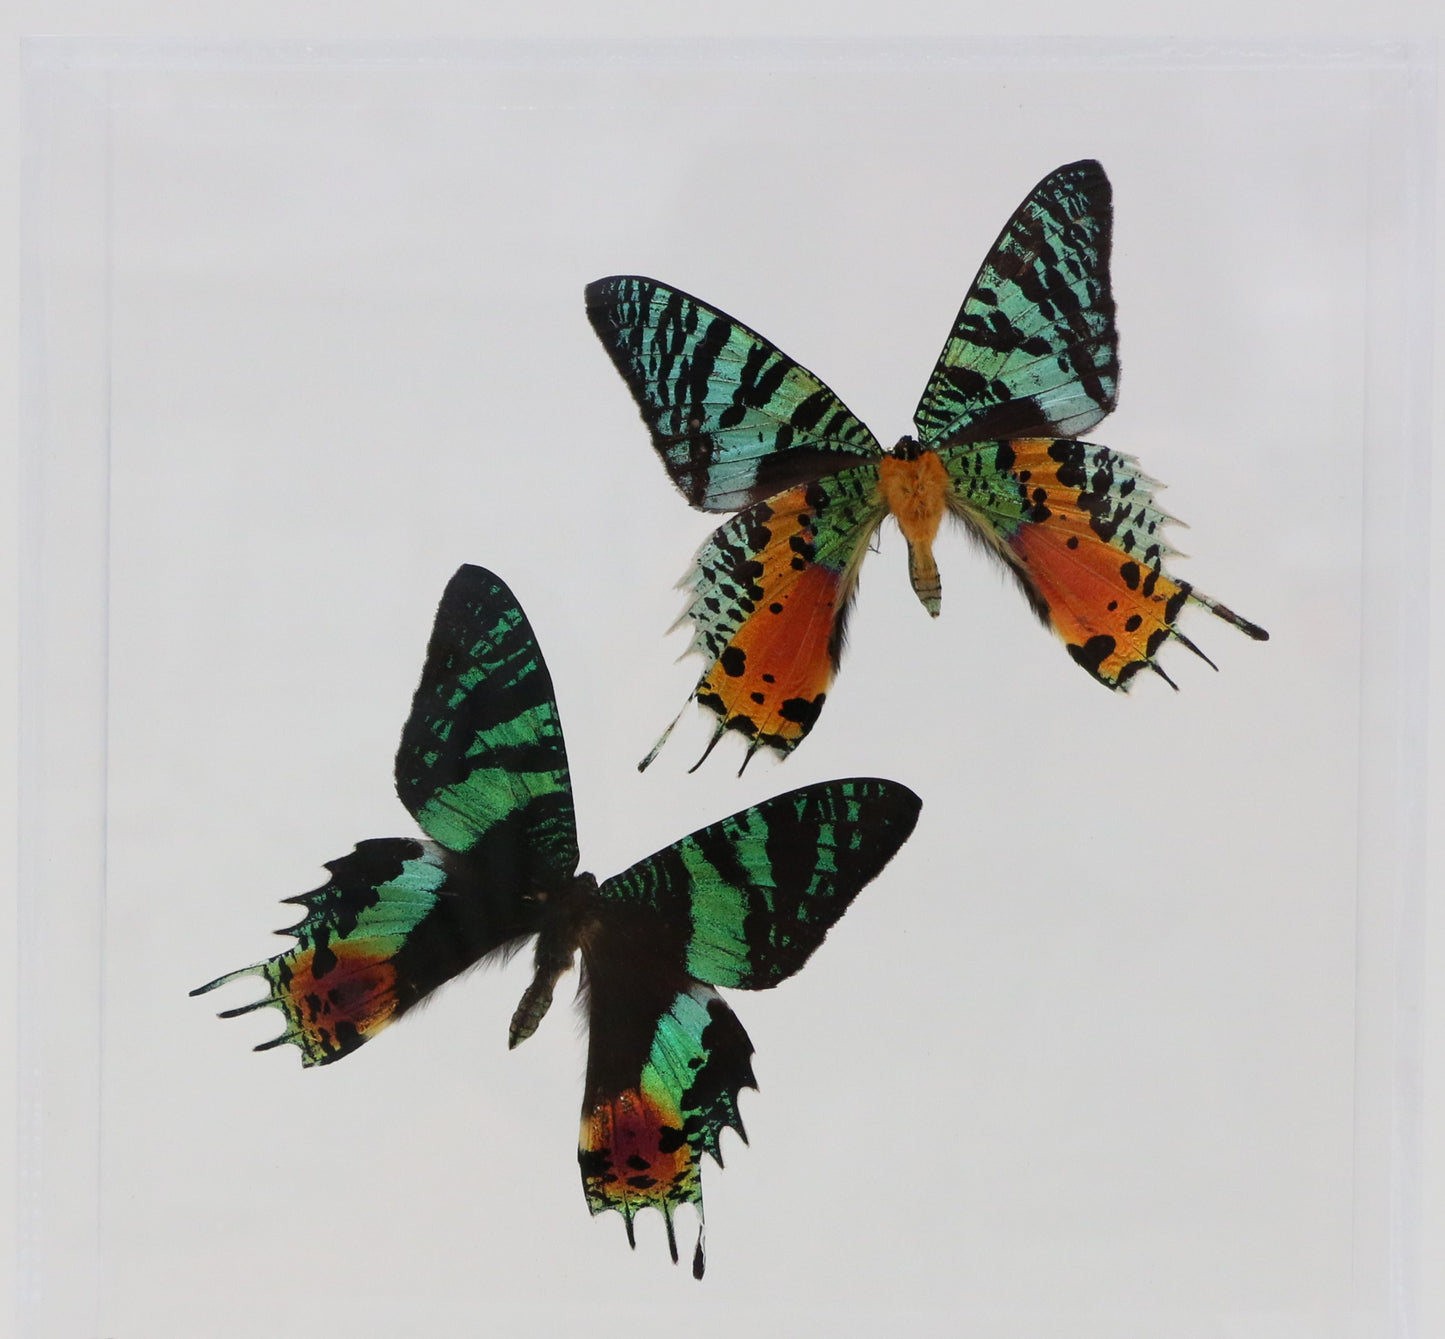 9080802 - Real Butterfly Acrylic Display Box - 8" X 8" - Sunset Moth (Urania ripheus) - Dorsal & Ventral